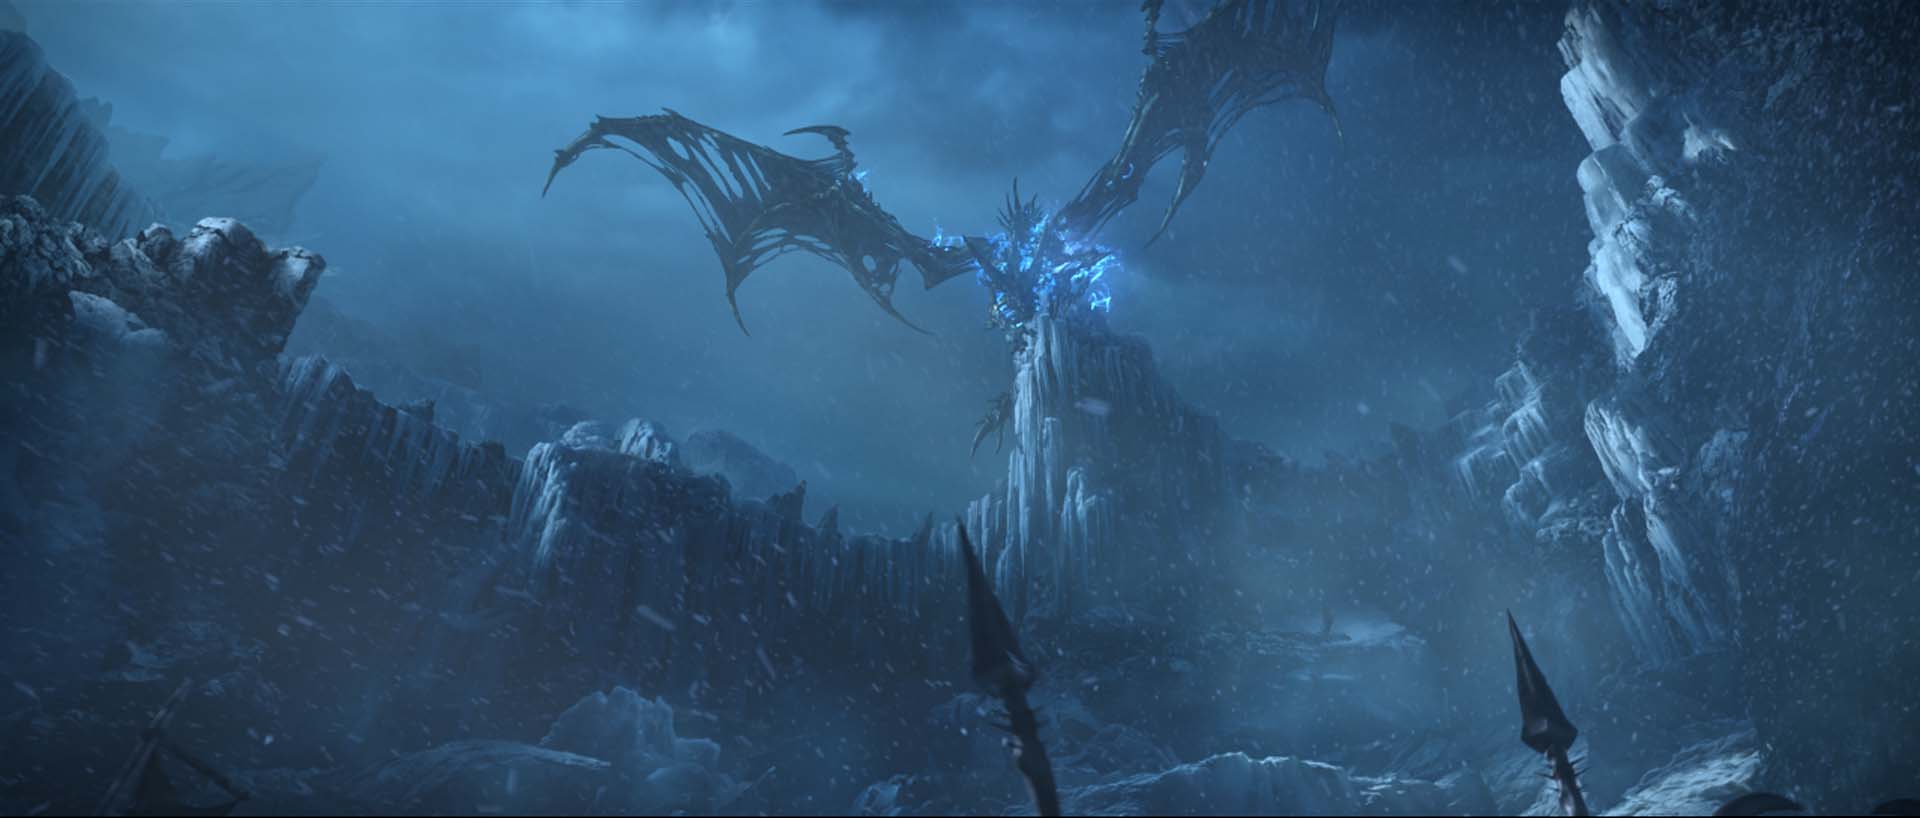 Blizzard Press Center of the Lich King Classic Reveal